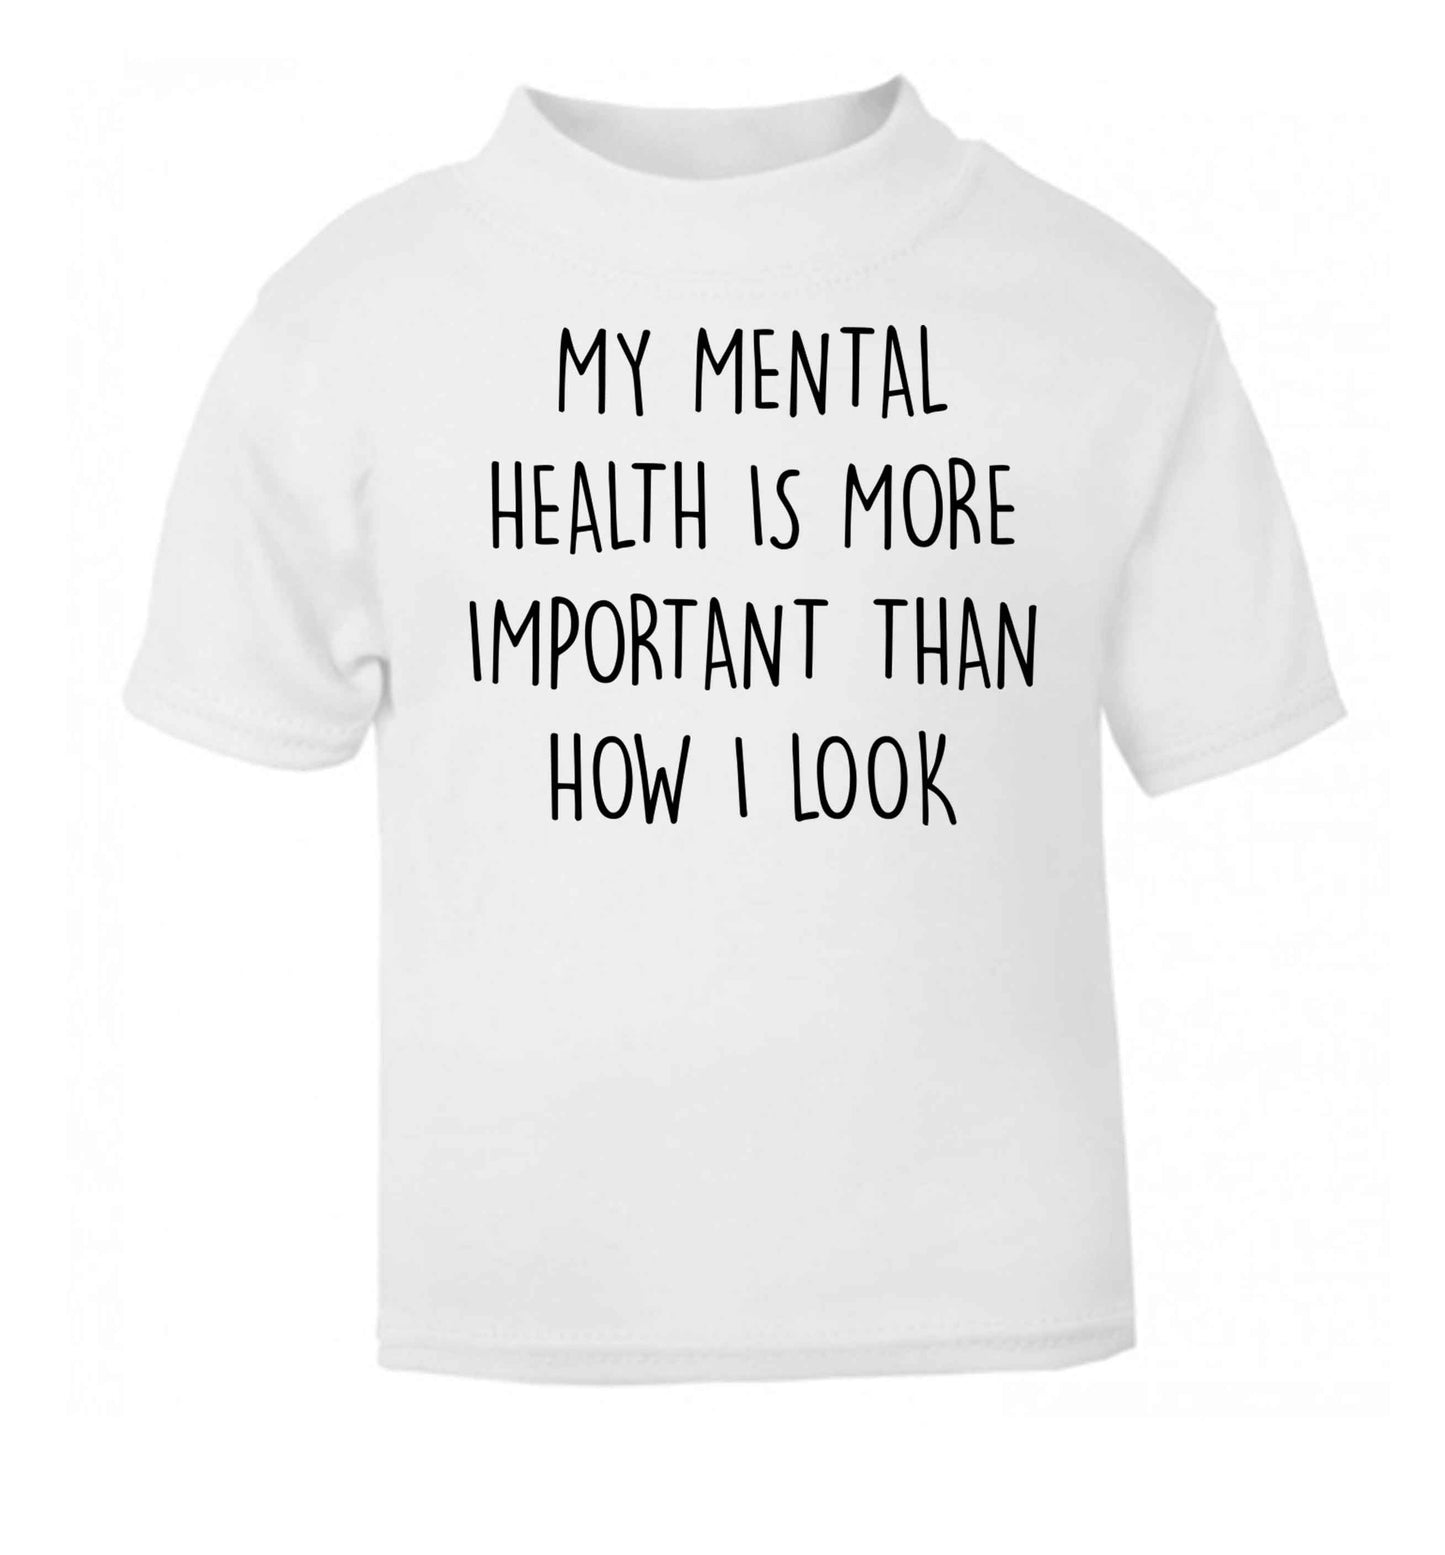 My mental health is more importnat than how I look white baby toddler Tshirt 2 Years